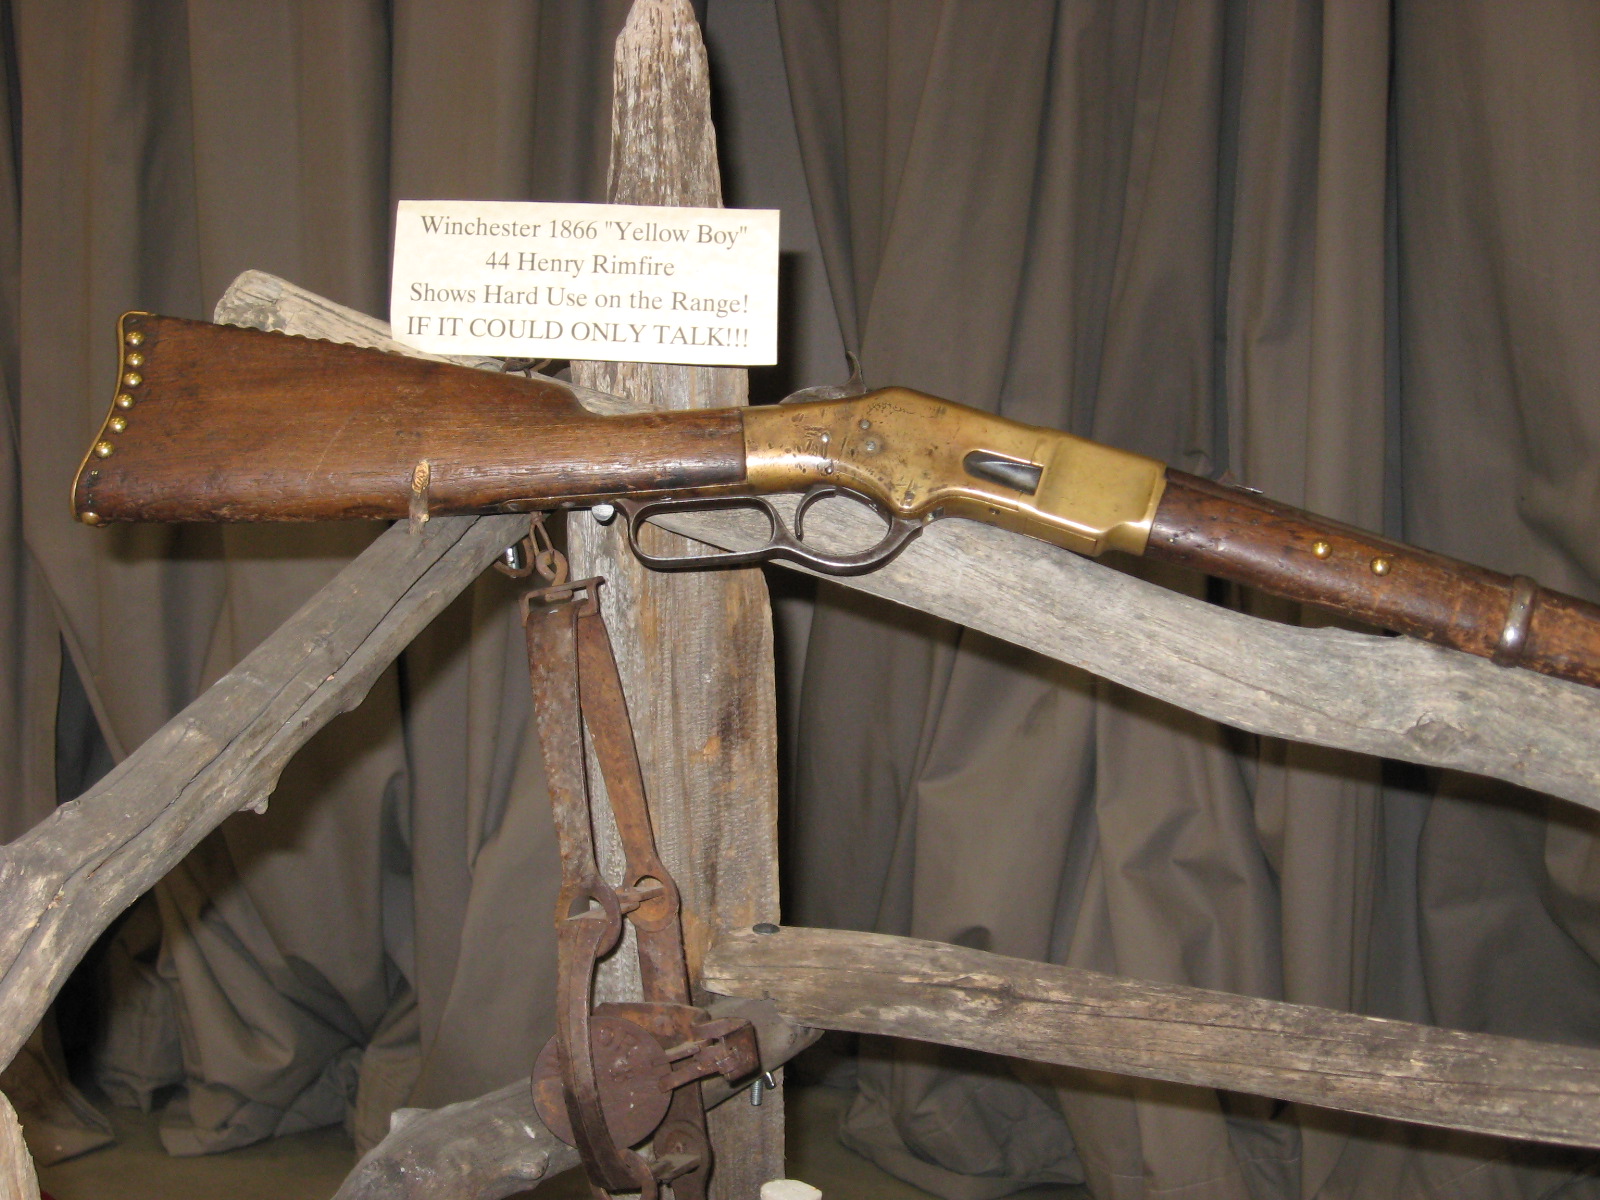 Winchester Repeating Arms - Rifles & Shotguns